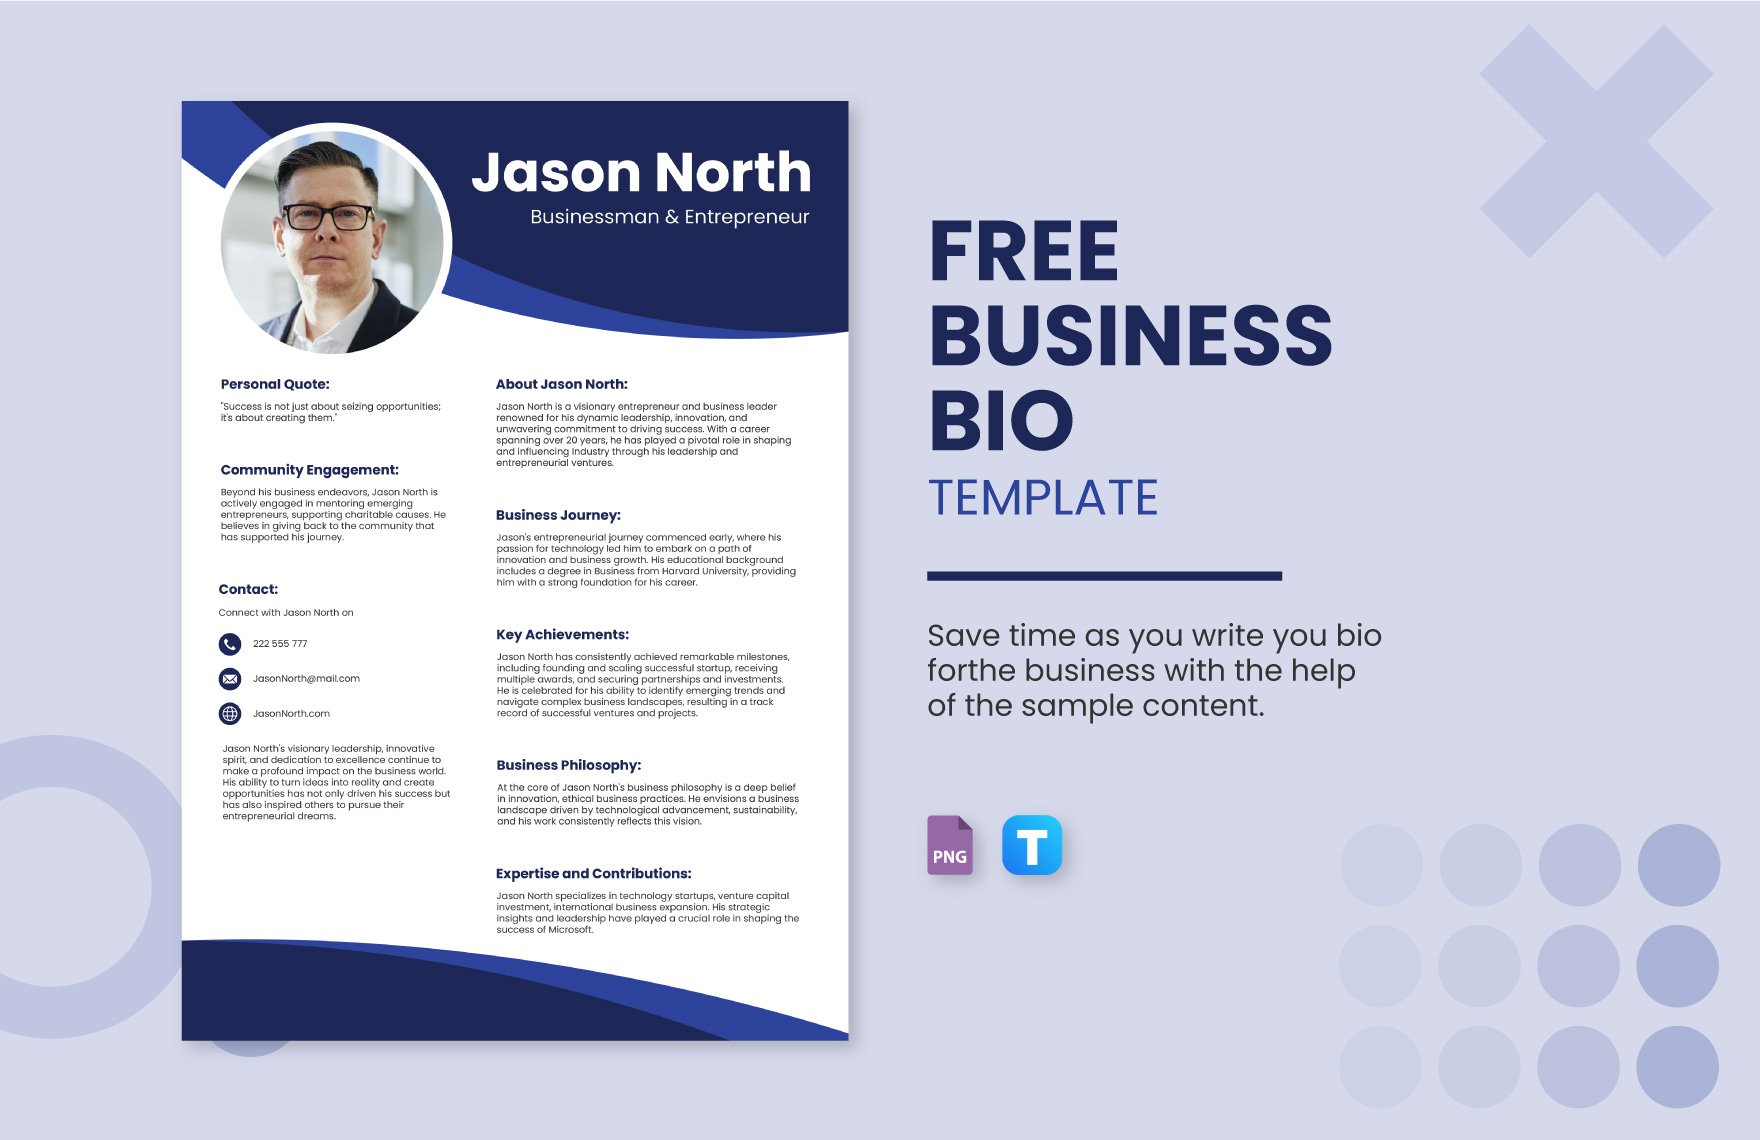 Free Business Bio Template in PNG